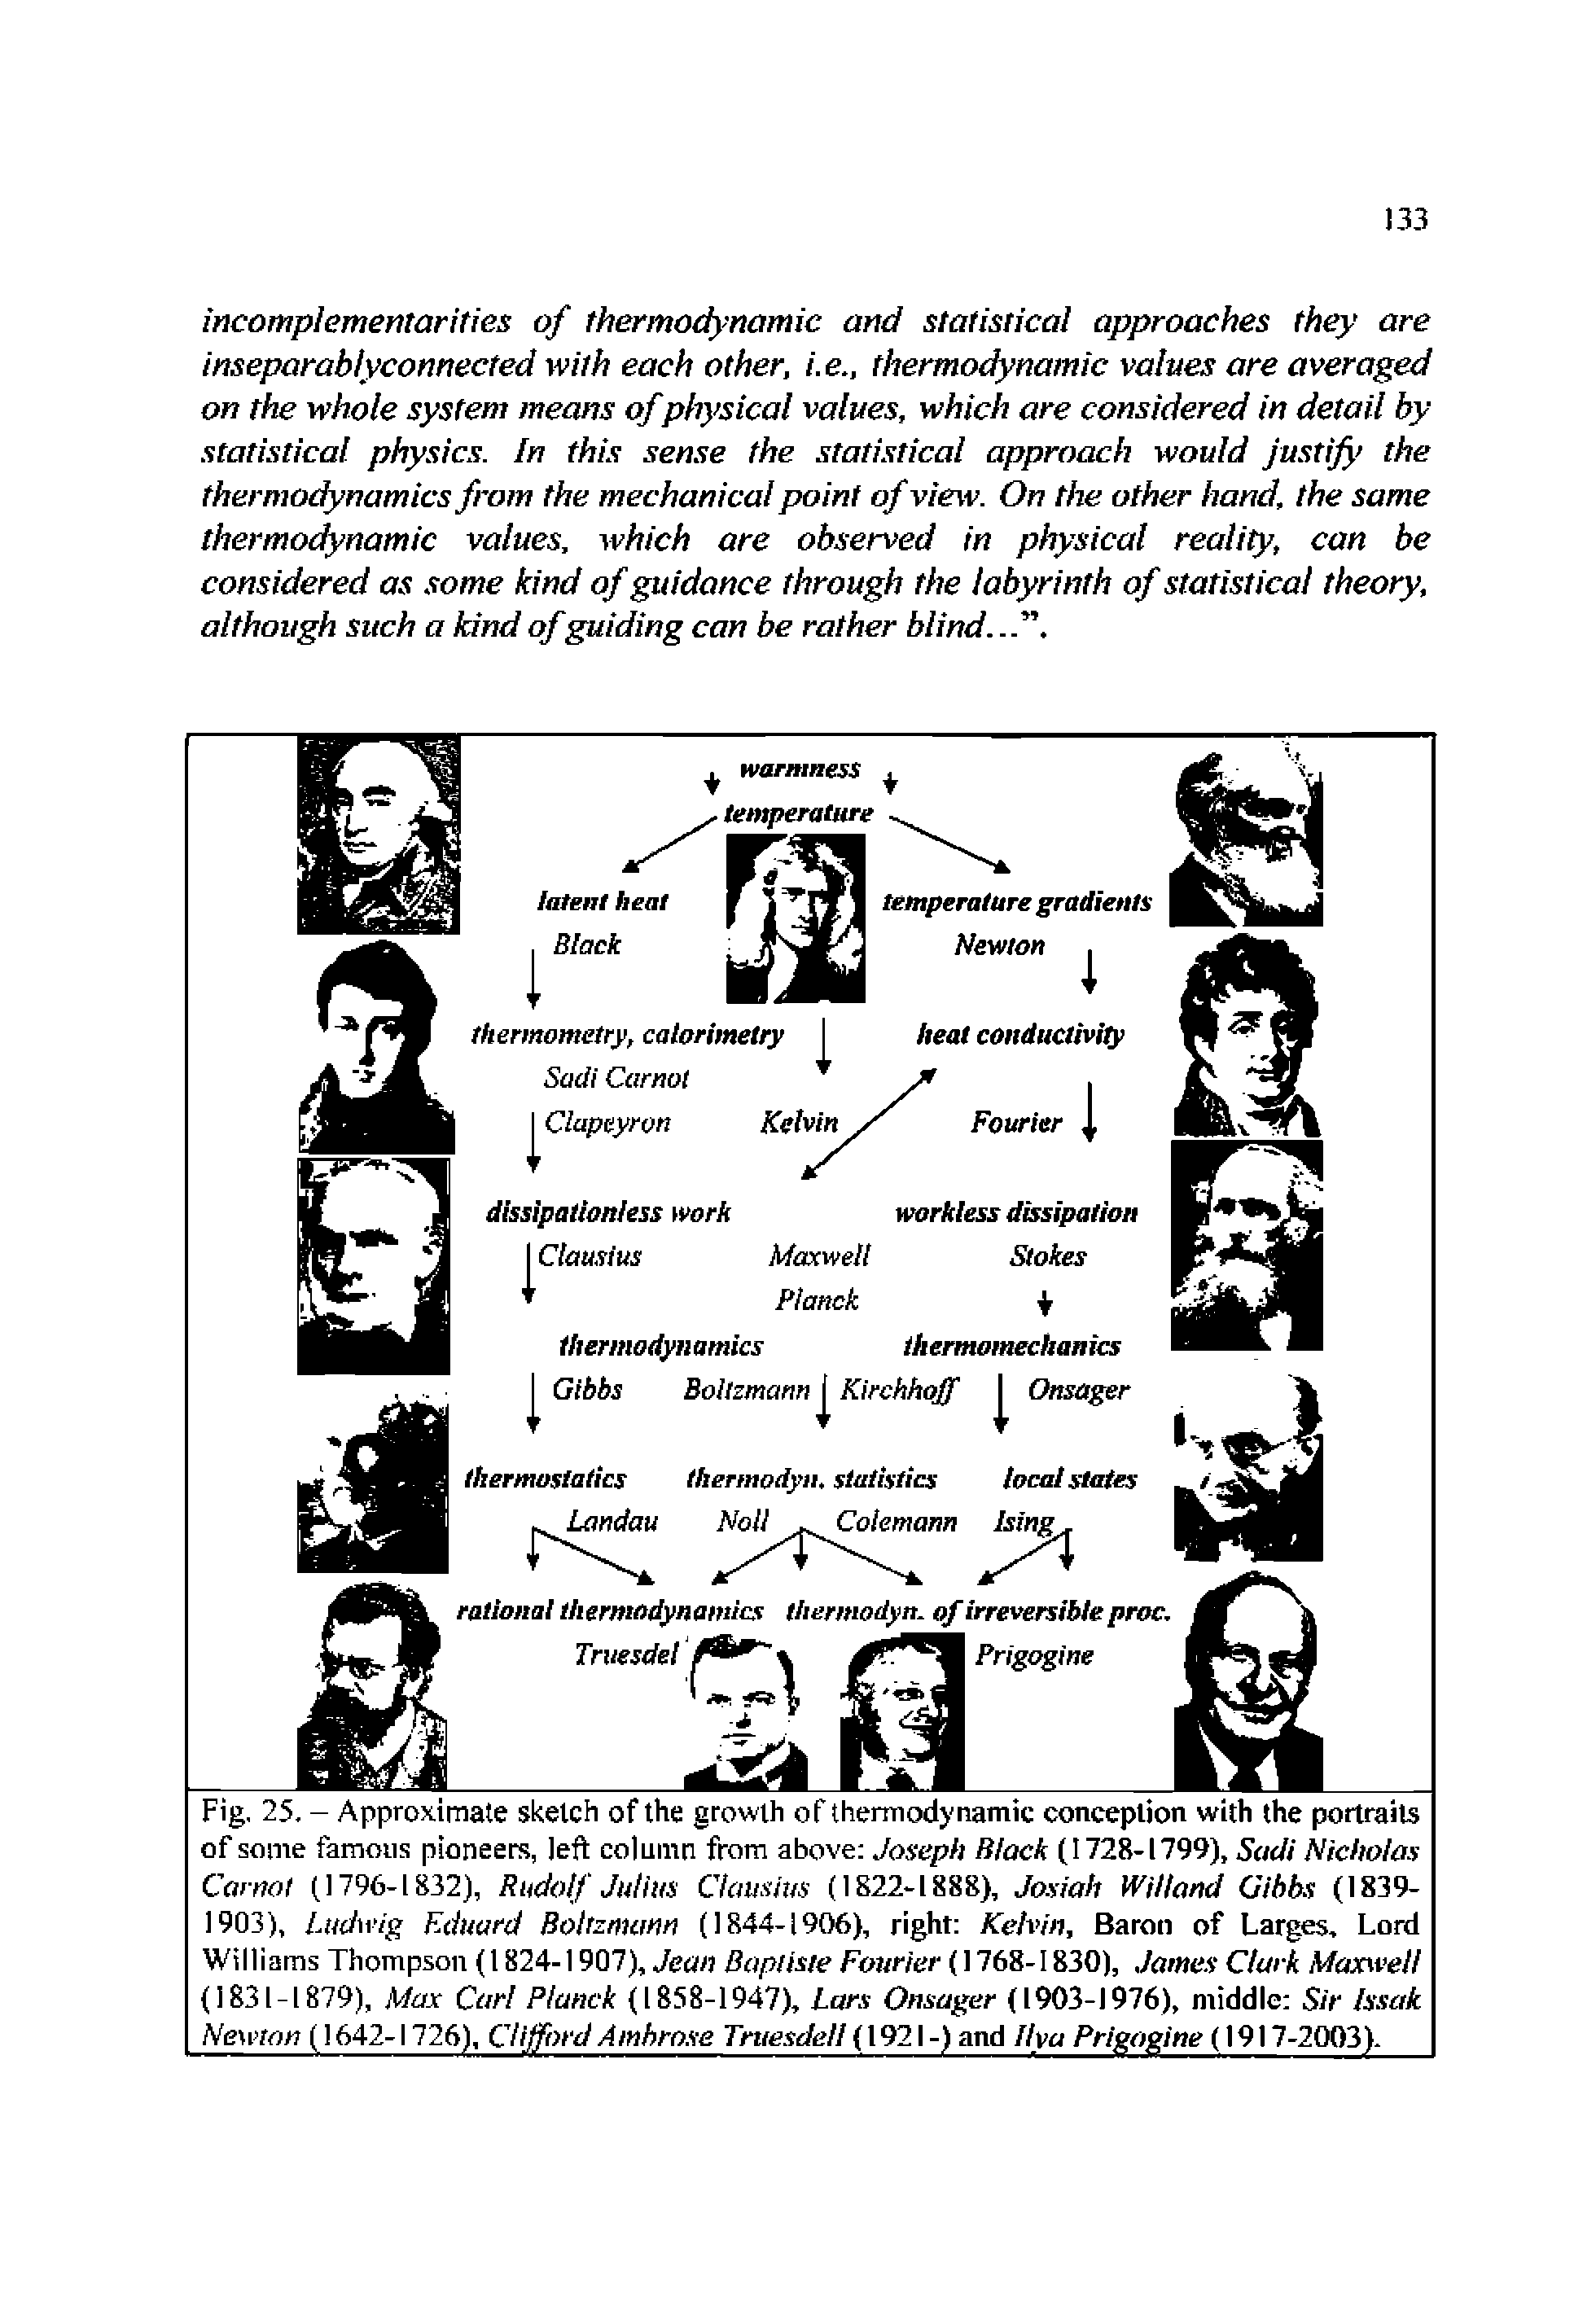 Fig. 25. - Approximate sketch of the growth of thermodynamic conception with the portraits of some famous pioneers, left column from above Joseph Black (1728-1799), Sadi Nicholas Carnot (1796-1832), Rudolf Jutius Clausius (1822-1888), Josiah Wiiland Gibbs (1839-1903), Ludwig Eduard Boltzmann (1844-1906), right Kelvin, Baron of Larges, Lord Williams Thompson (1824-1907), Jean Baptiste Fourier (1768-1830), James Clark Maxwell (1831-1879), Max Carl Planck (1858-1947), Lars Onsager (1903-1976), middle Sir Issak Newton (1642-1726), Clifford Ambrose Truesdell (1921 -) and Ilya Prigogine (1917-2003).